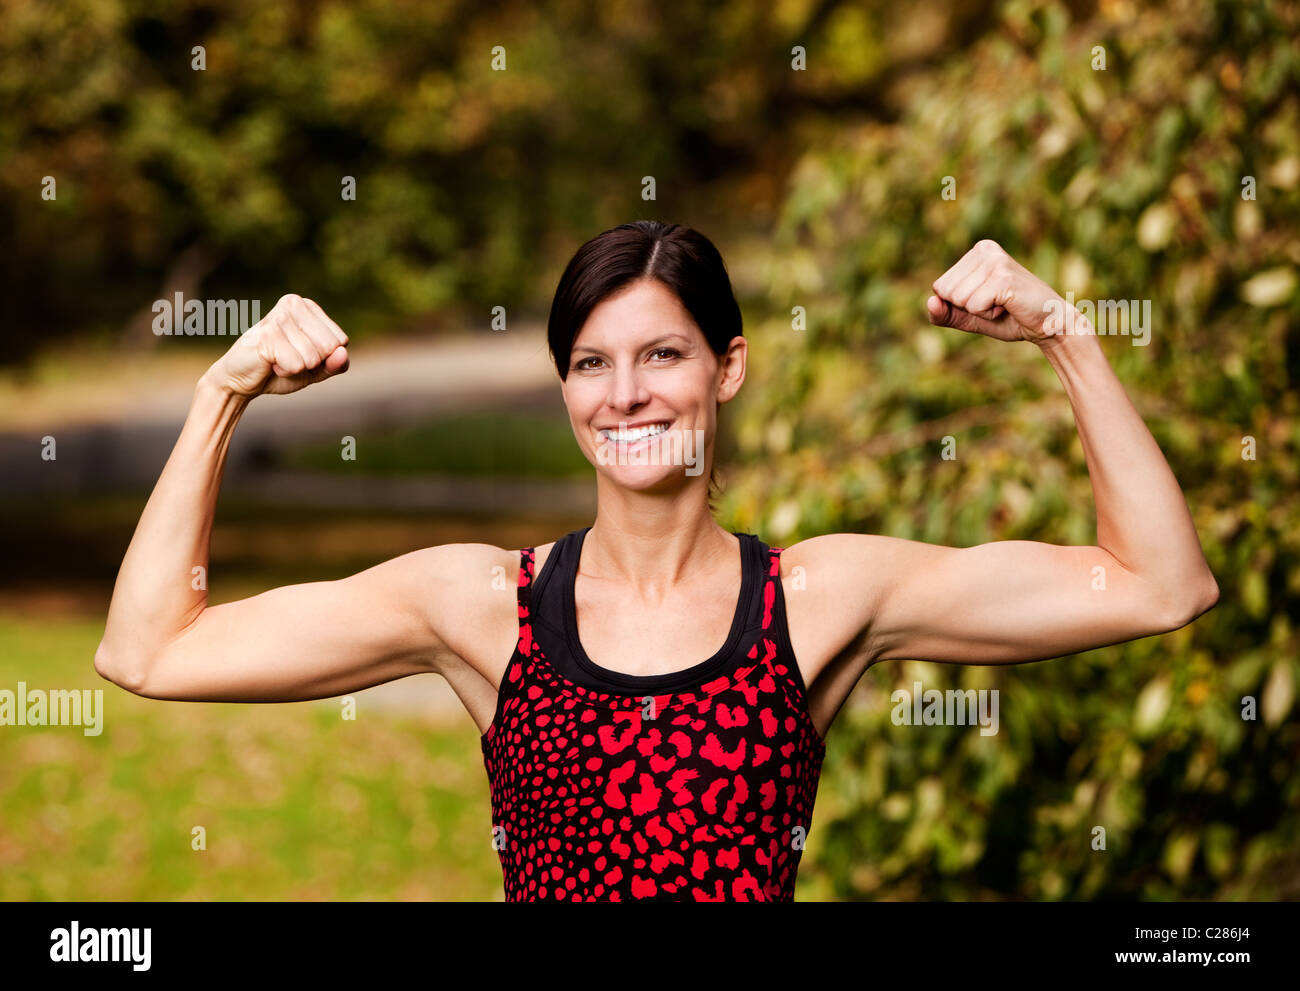 A female fitness model flexing her biceps Stock Photo - Alamy